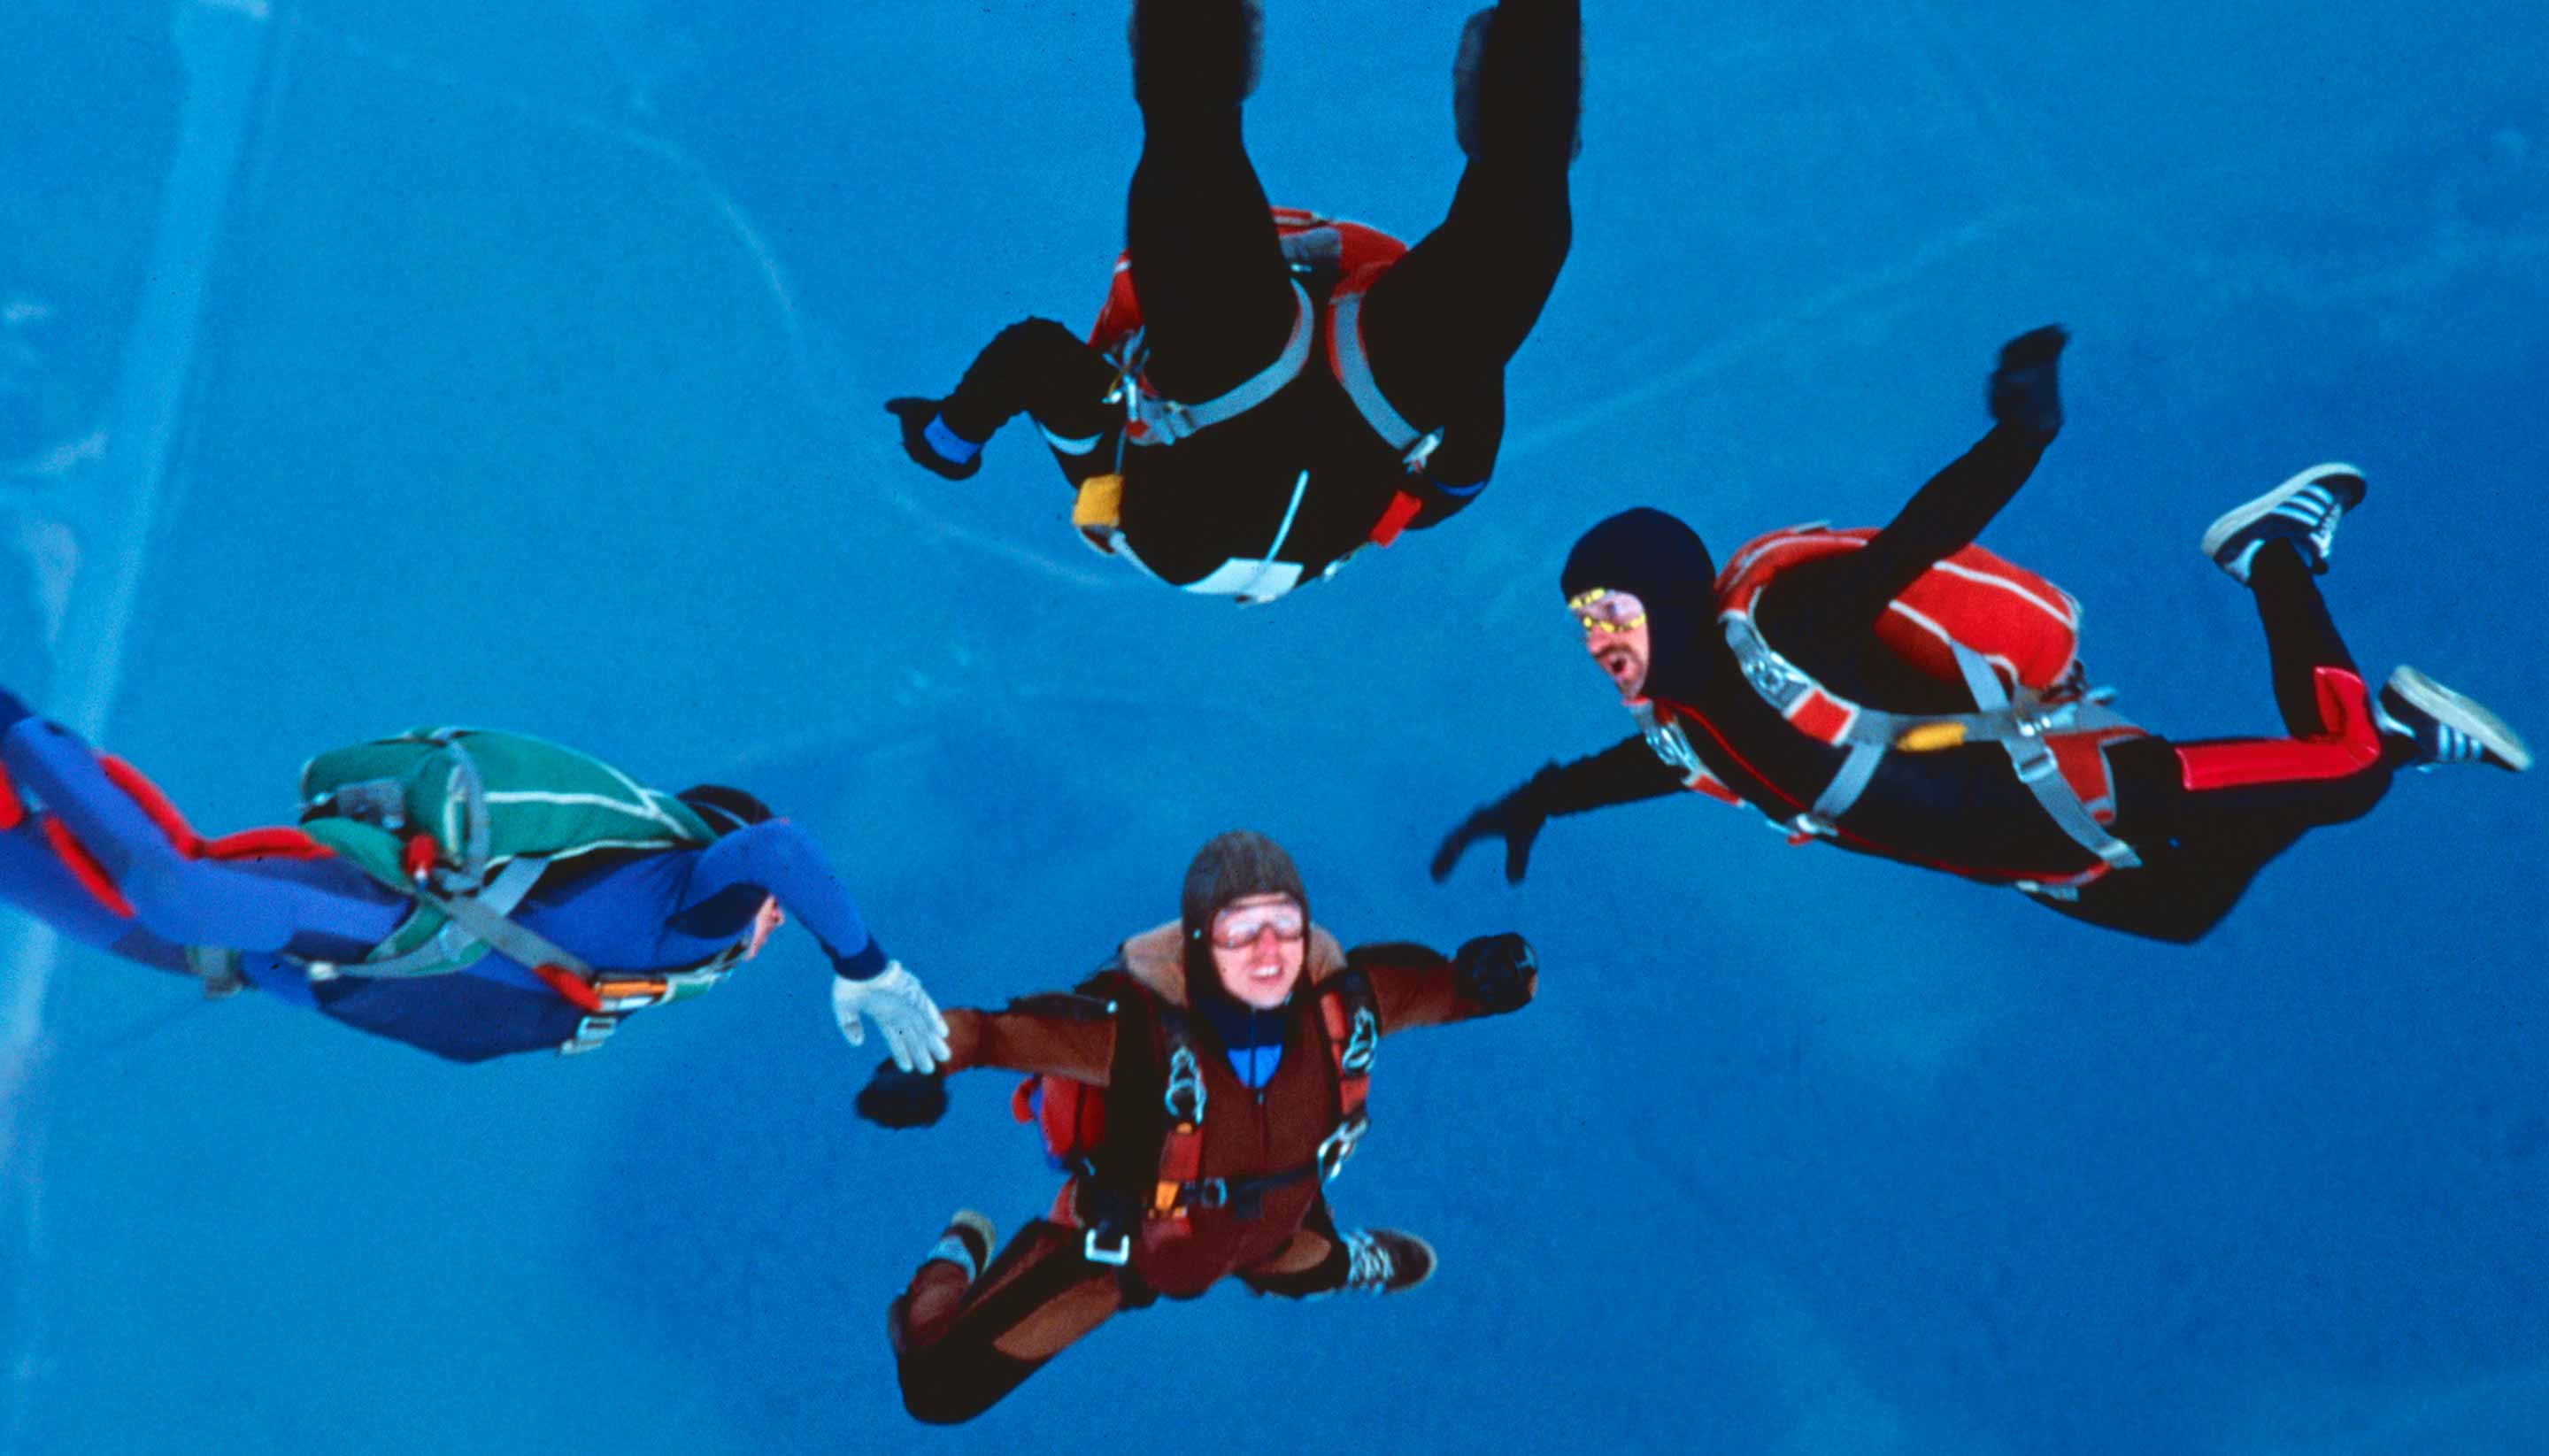 Russian Skydivers